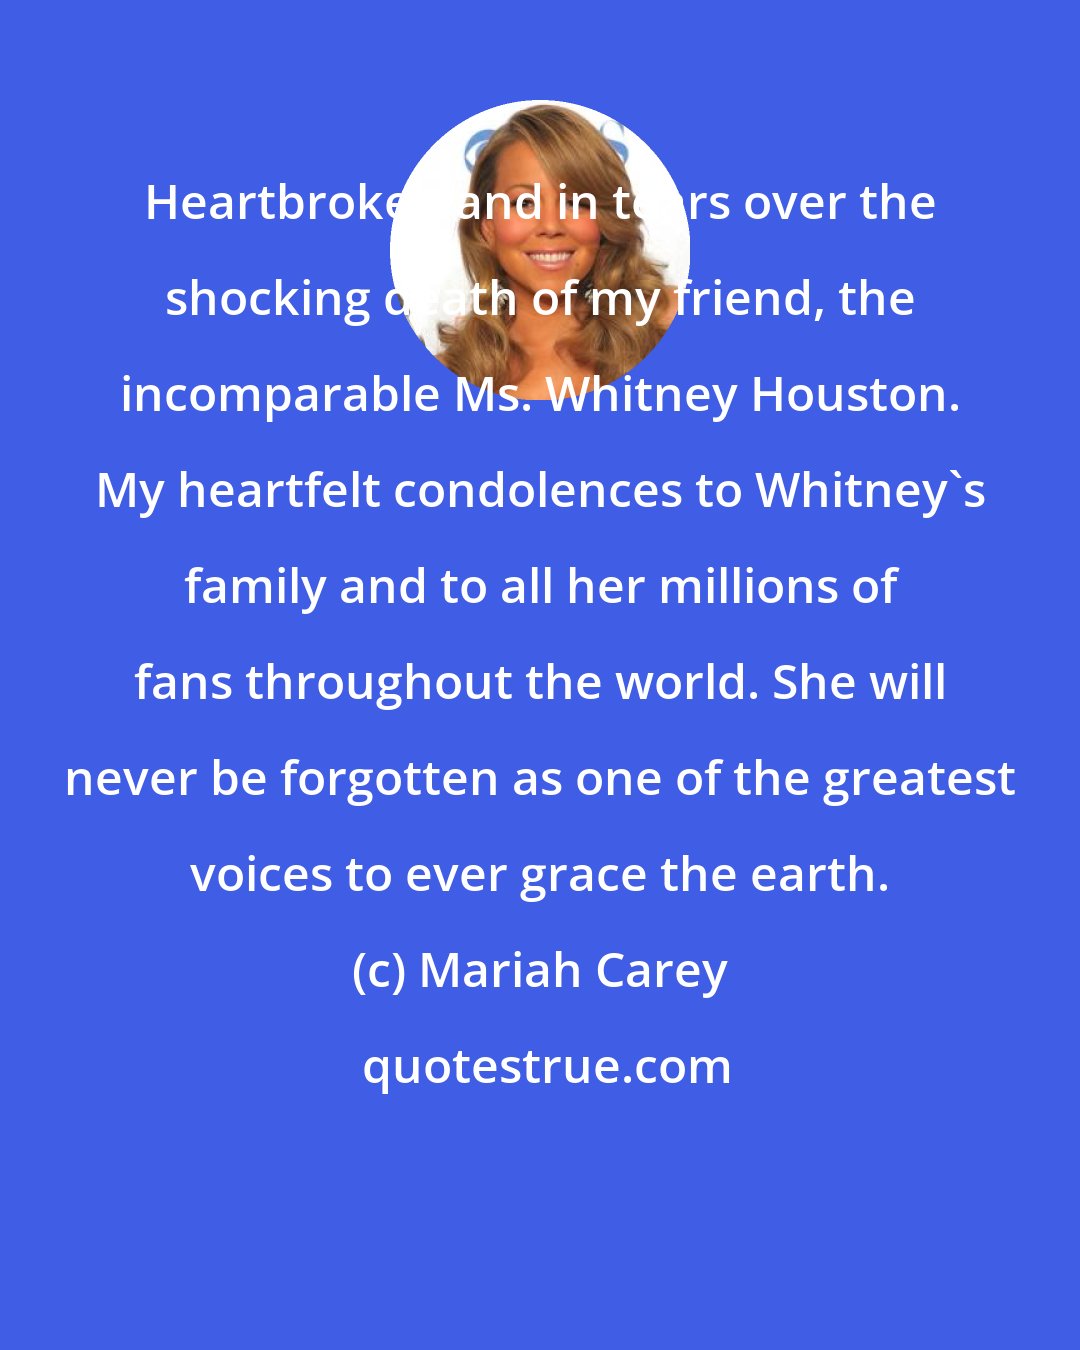 Mariah Carey: Heartbroken and in tears over the shocking death of my friend, the incomparable Ms. Whitney Houston. My heartfelt condolences to Whitney's family and to all her millions of fans throughout the world. She will never be forgotten as one of the greatest voices to ever grace the earth.